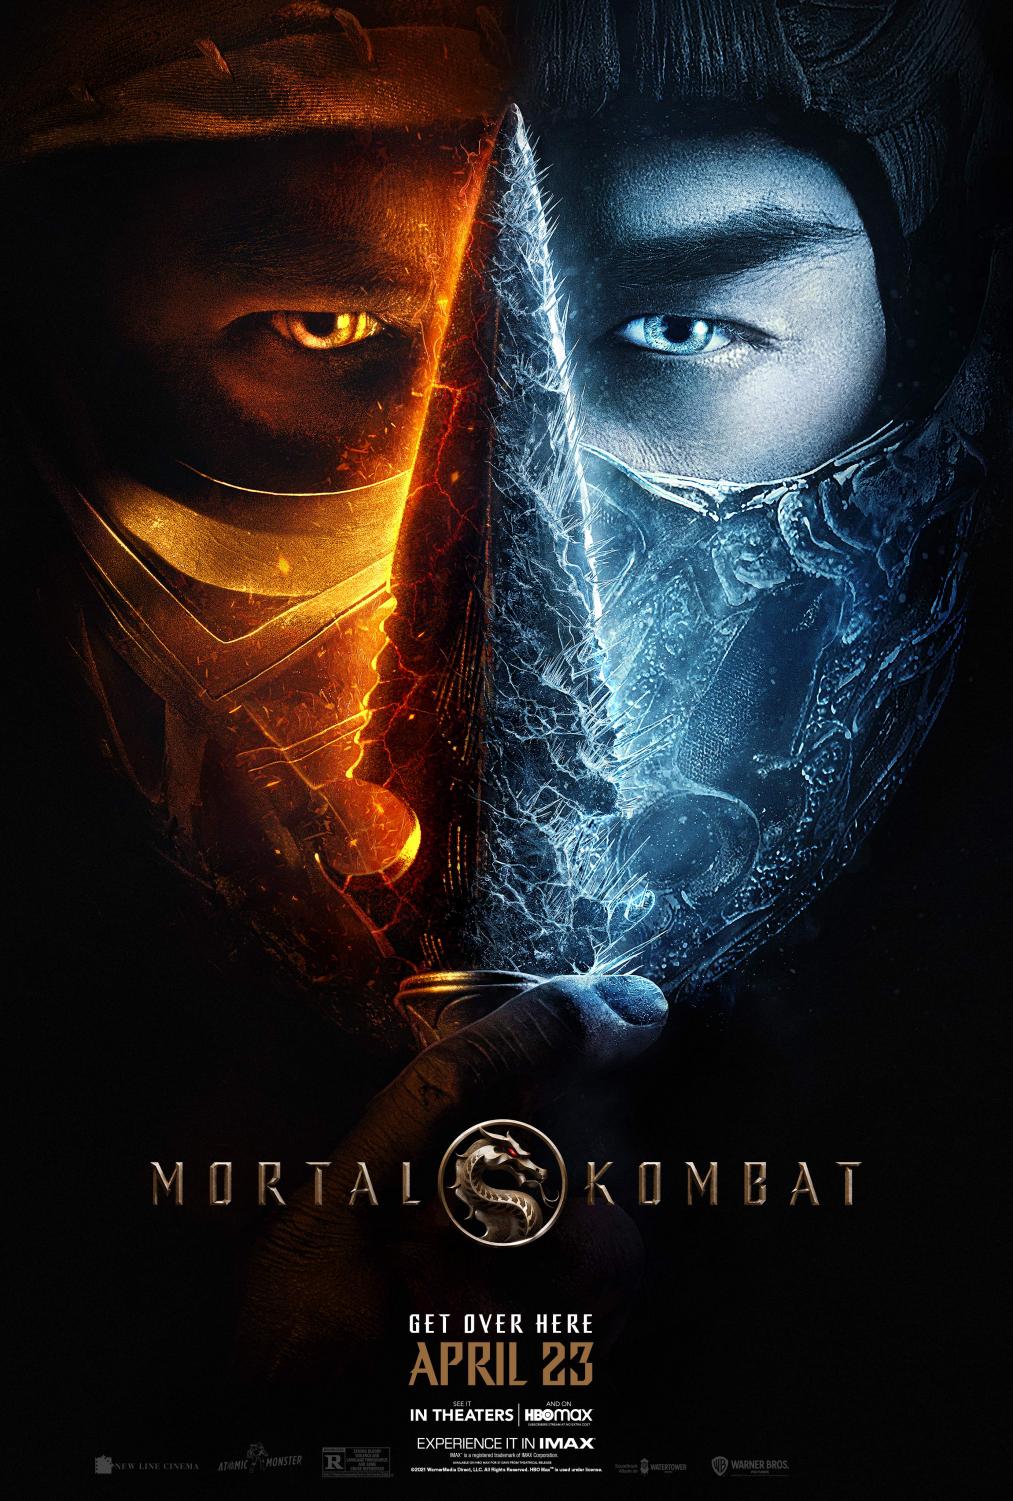 Mortal Kombat Was a Flawless Victory – The Norse Code